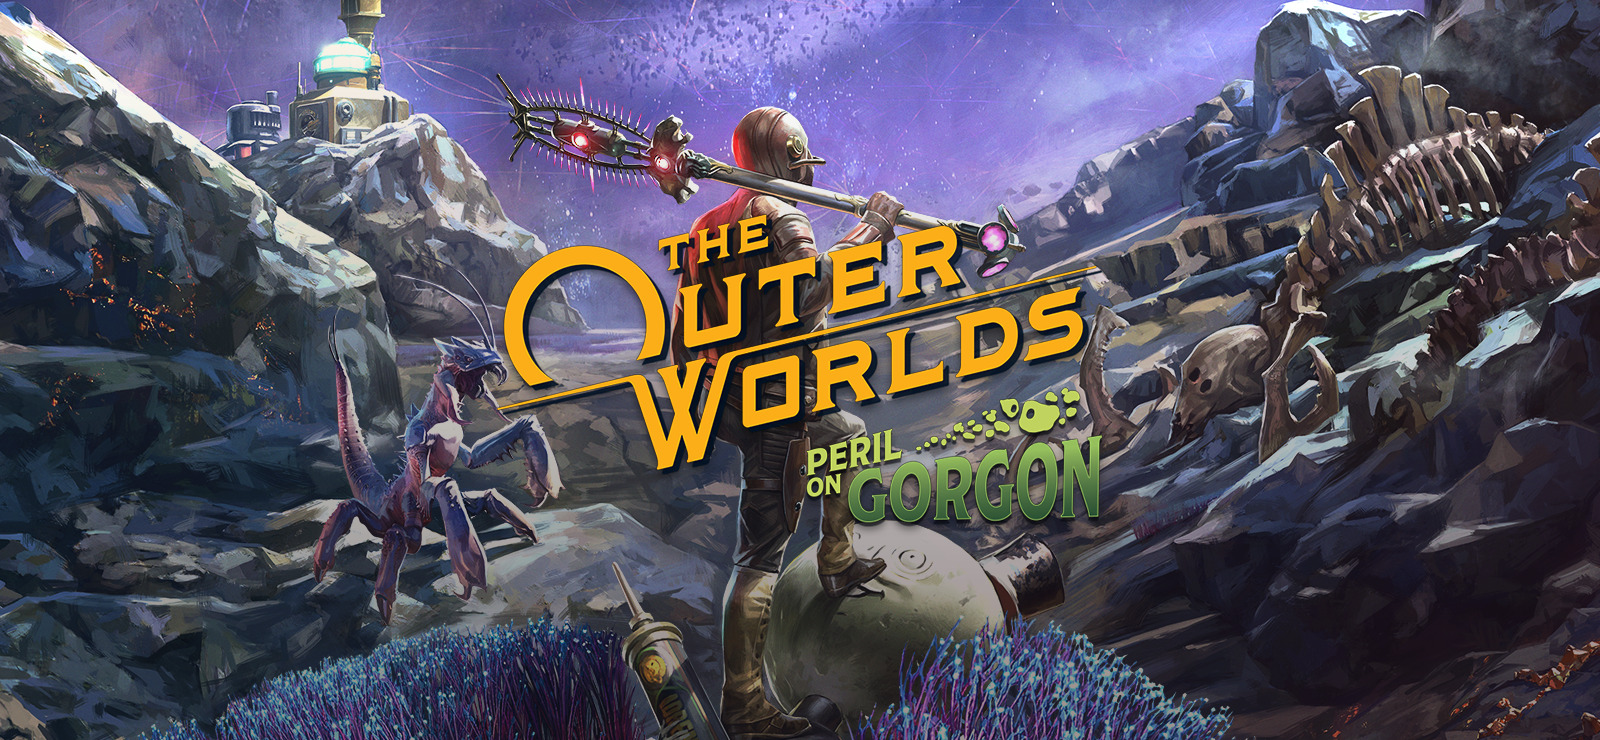 The Outer Worlds: Peril on Gorgon - Metacritic